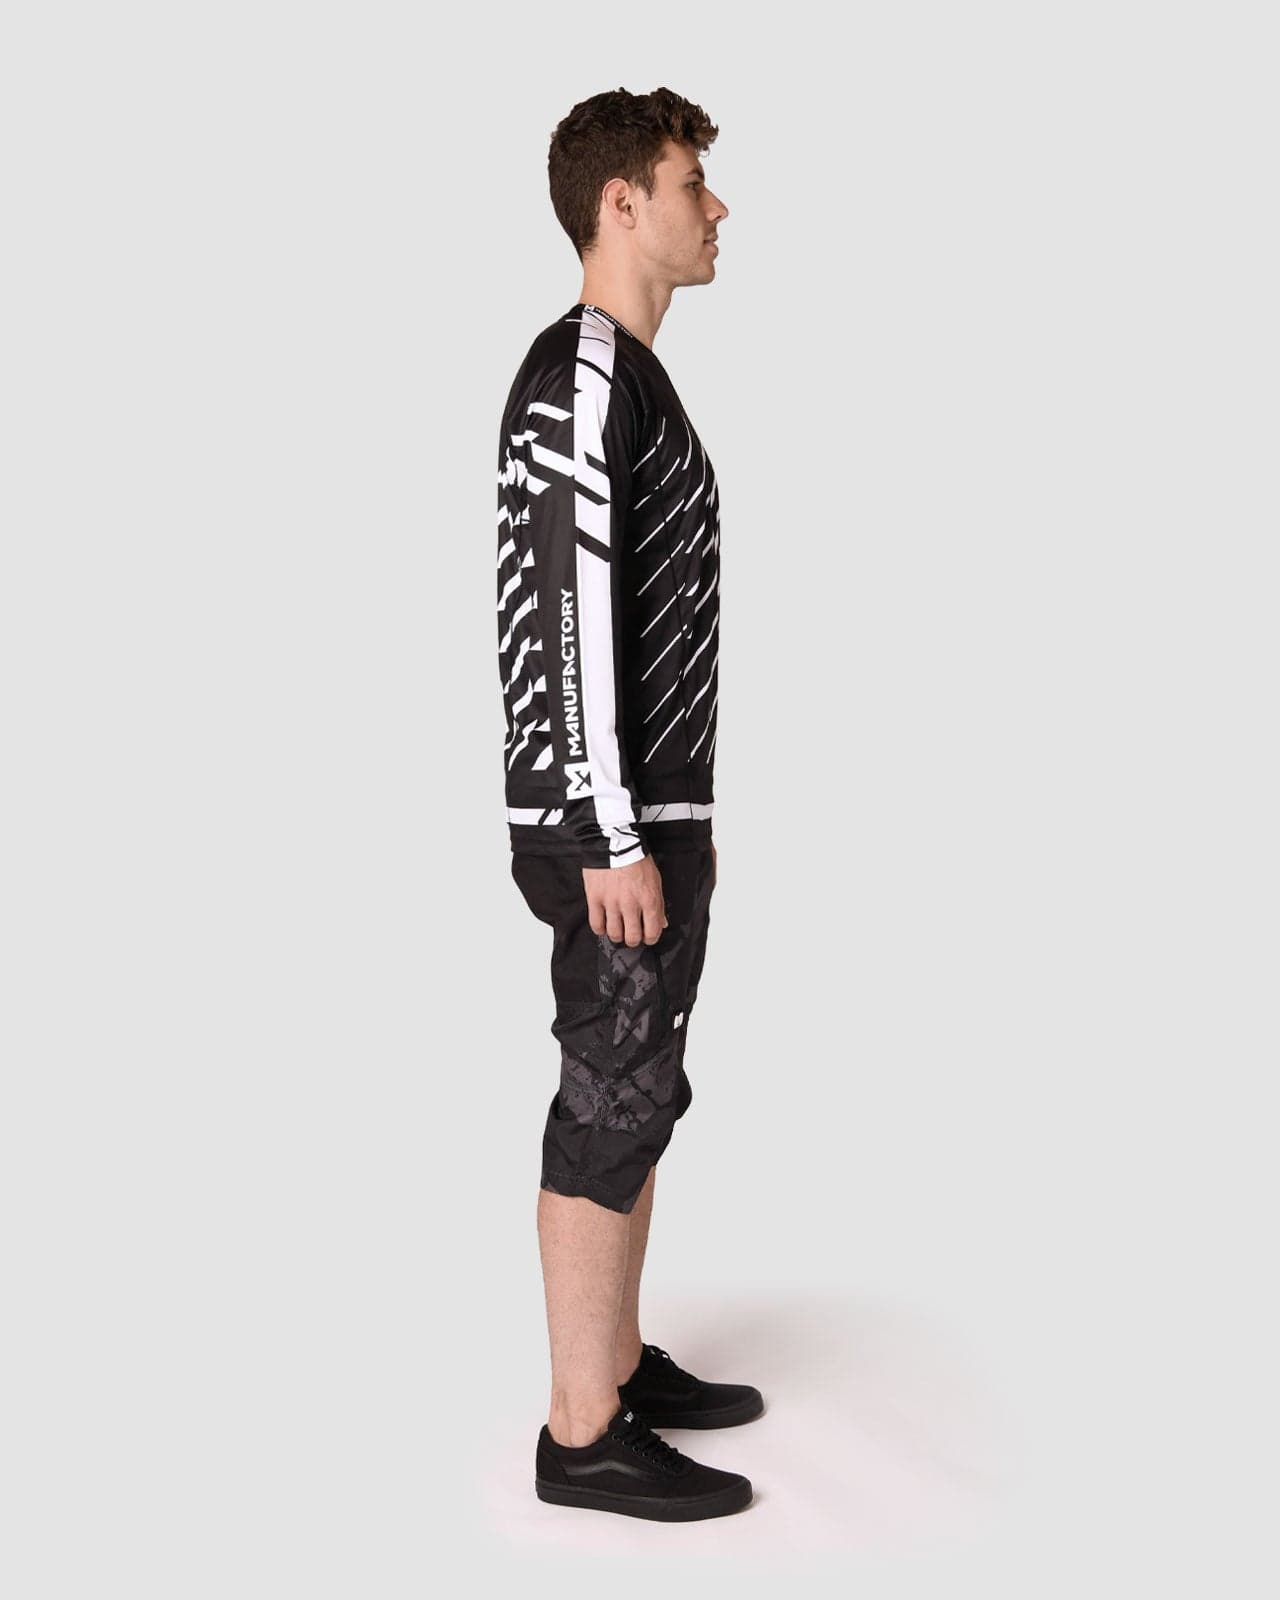 Manufactory Apparel Physical product Electrix MX Series Jersey